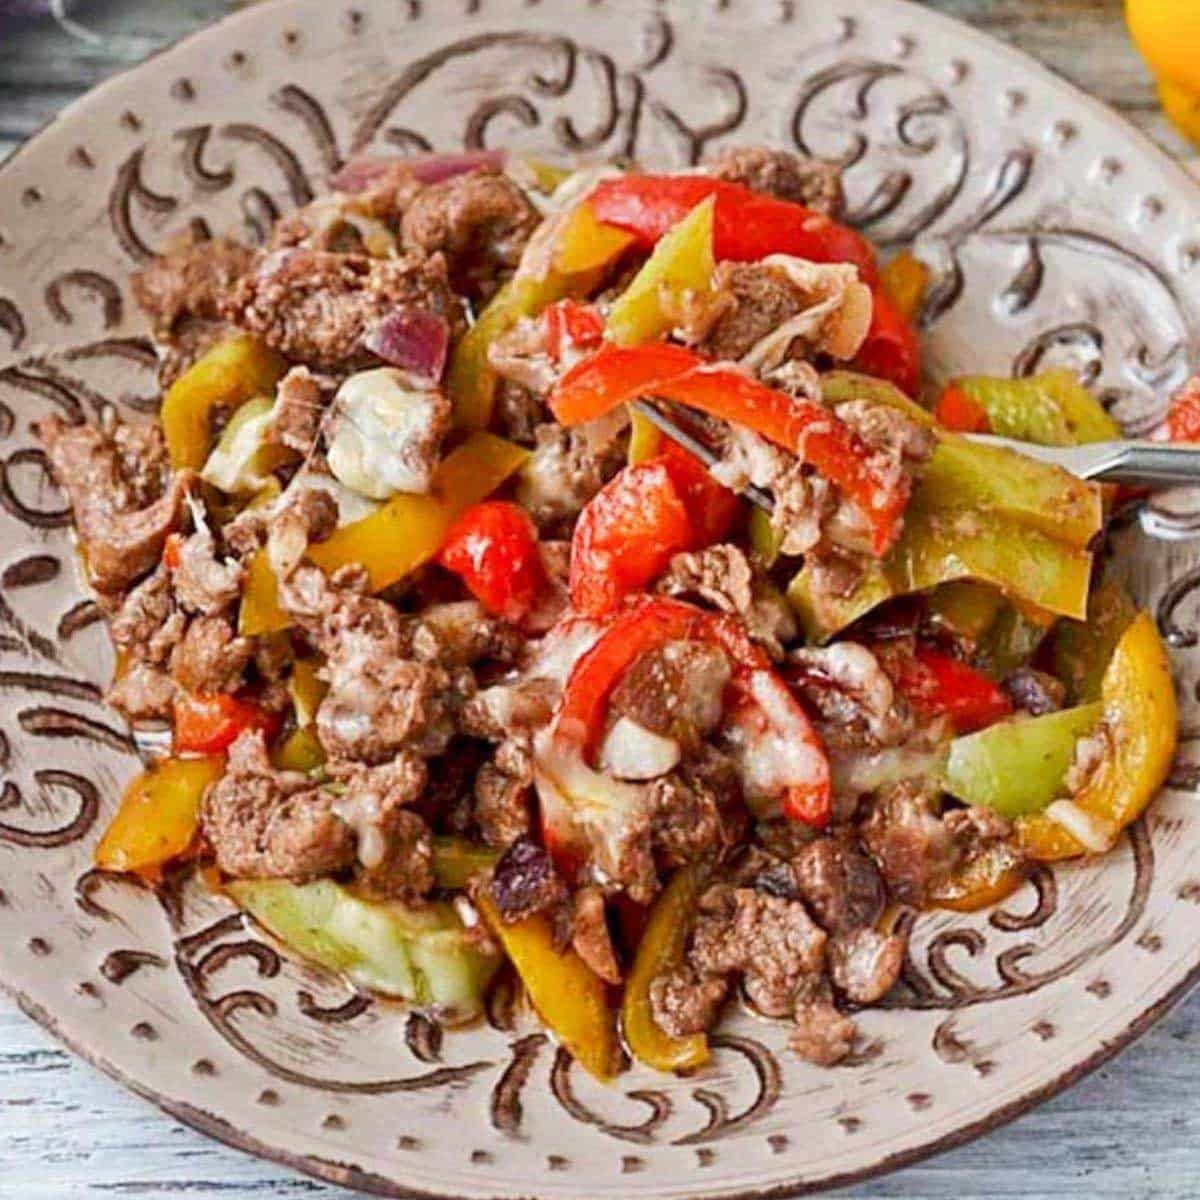 Thumbnail of low calorie beef stir fry.